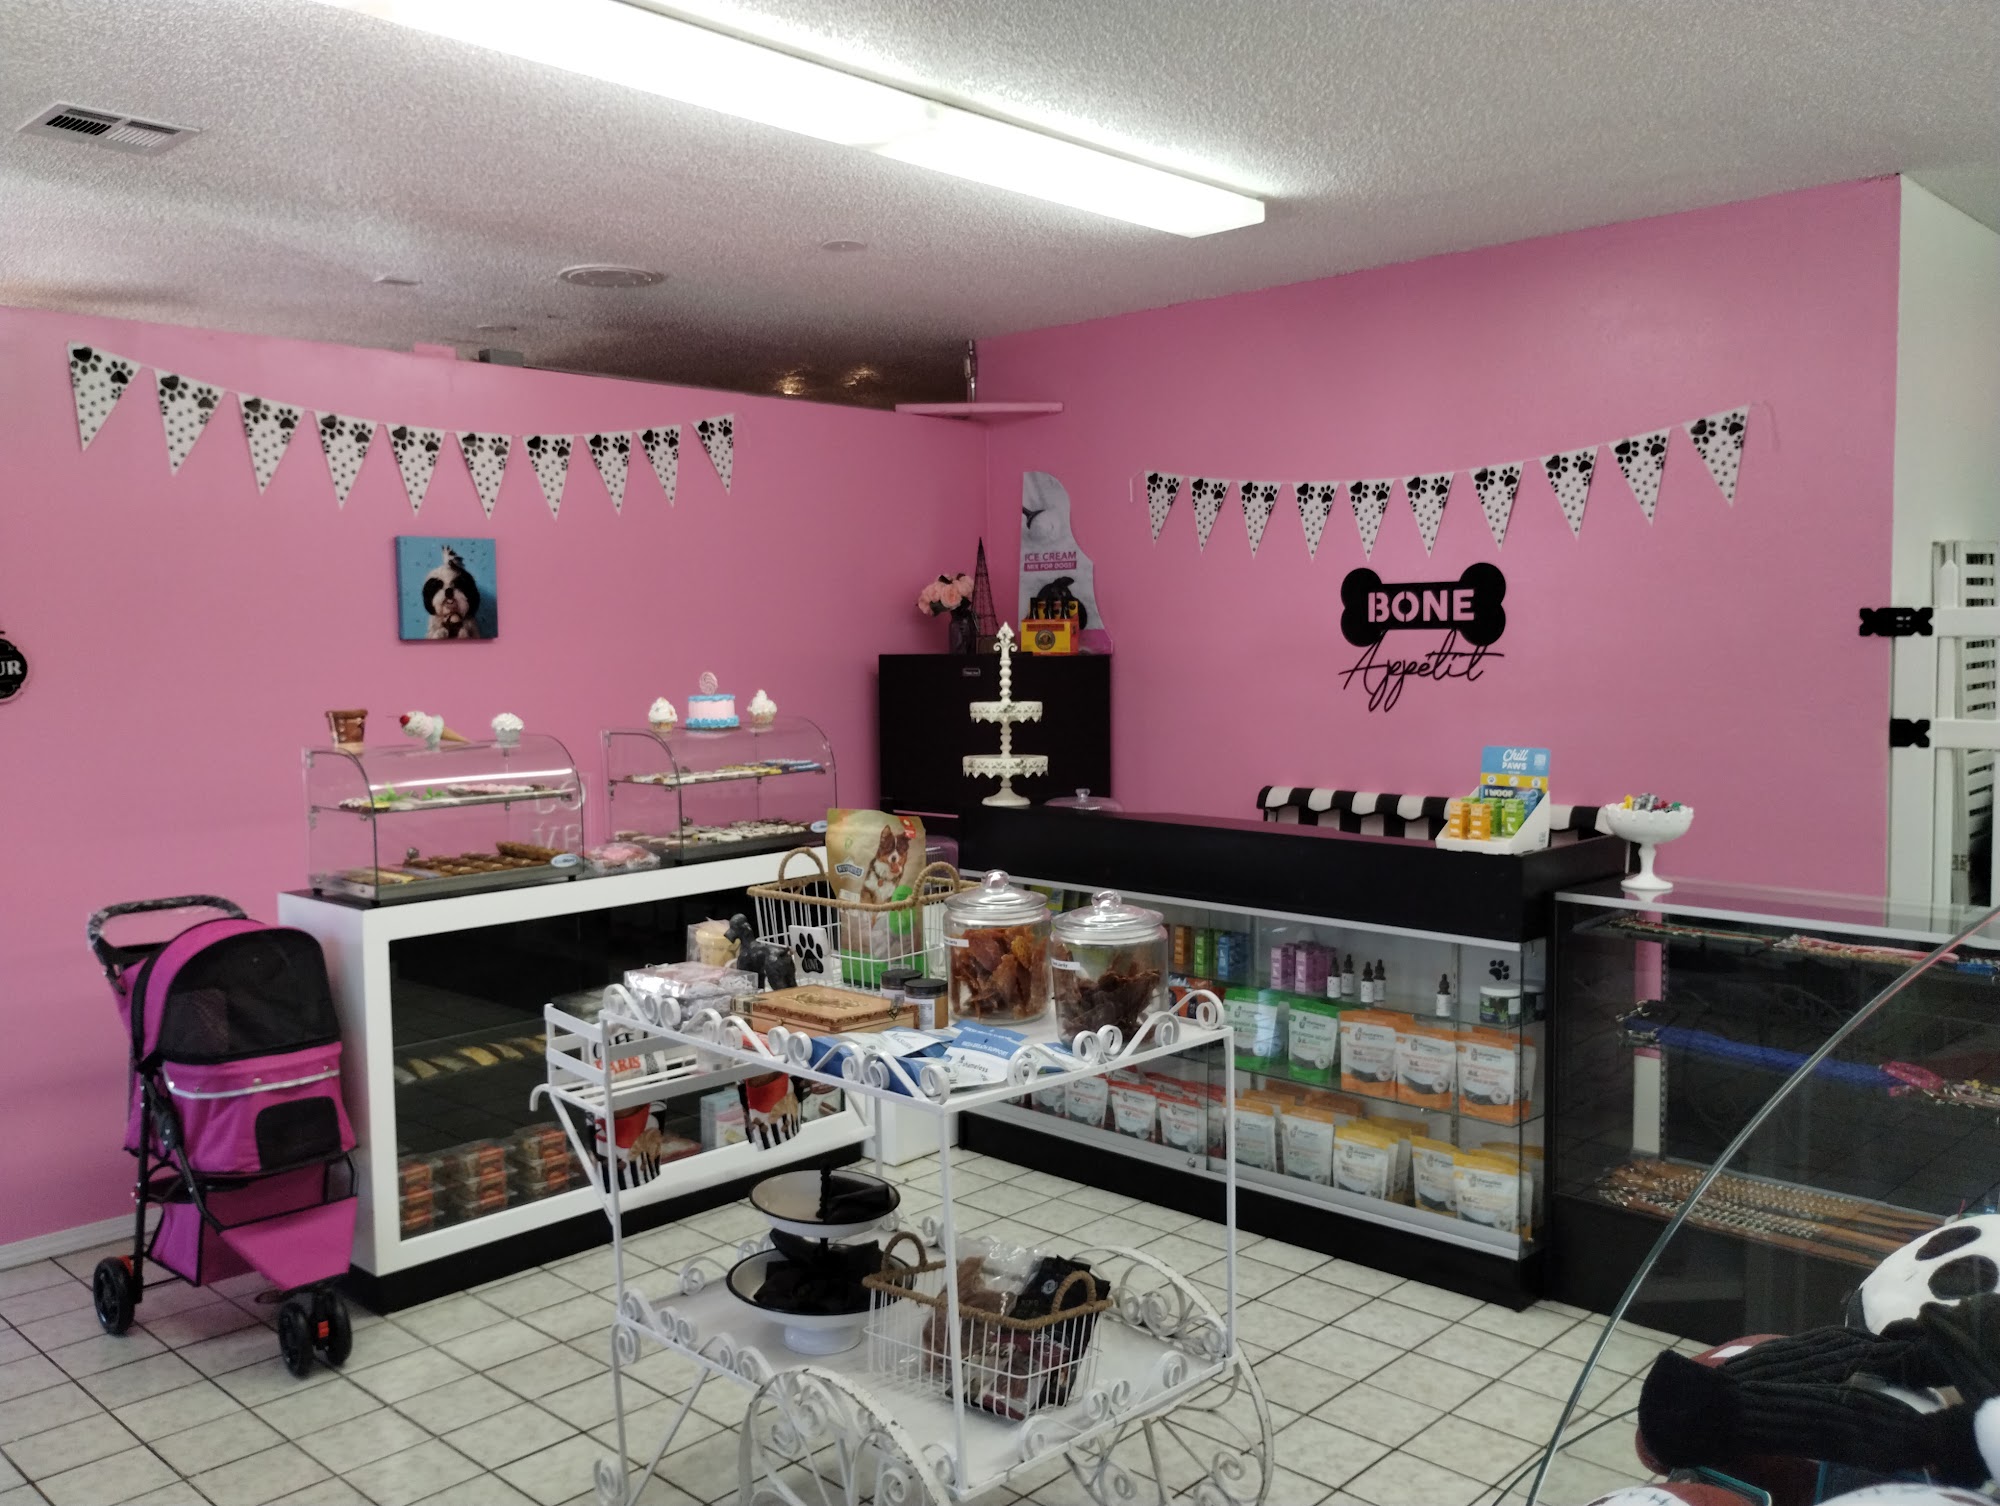 Kandys Pups 'N' Stuff Pet Spa & Hotel 204 N 3rd Ave Suite D, Barstow California 92311